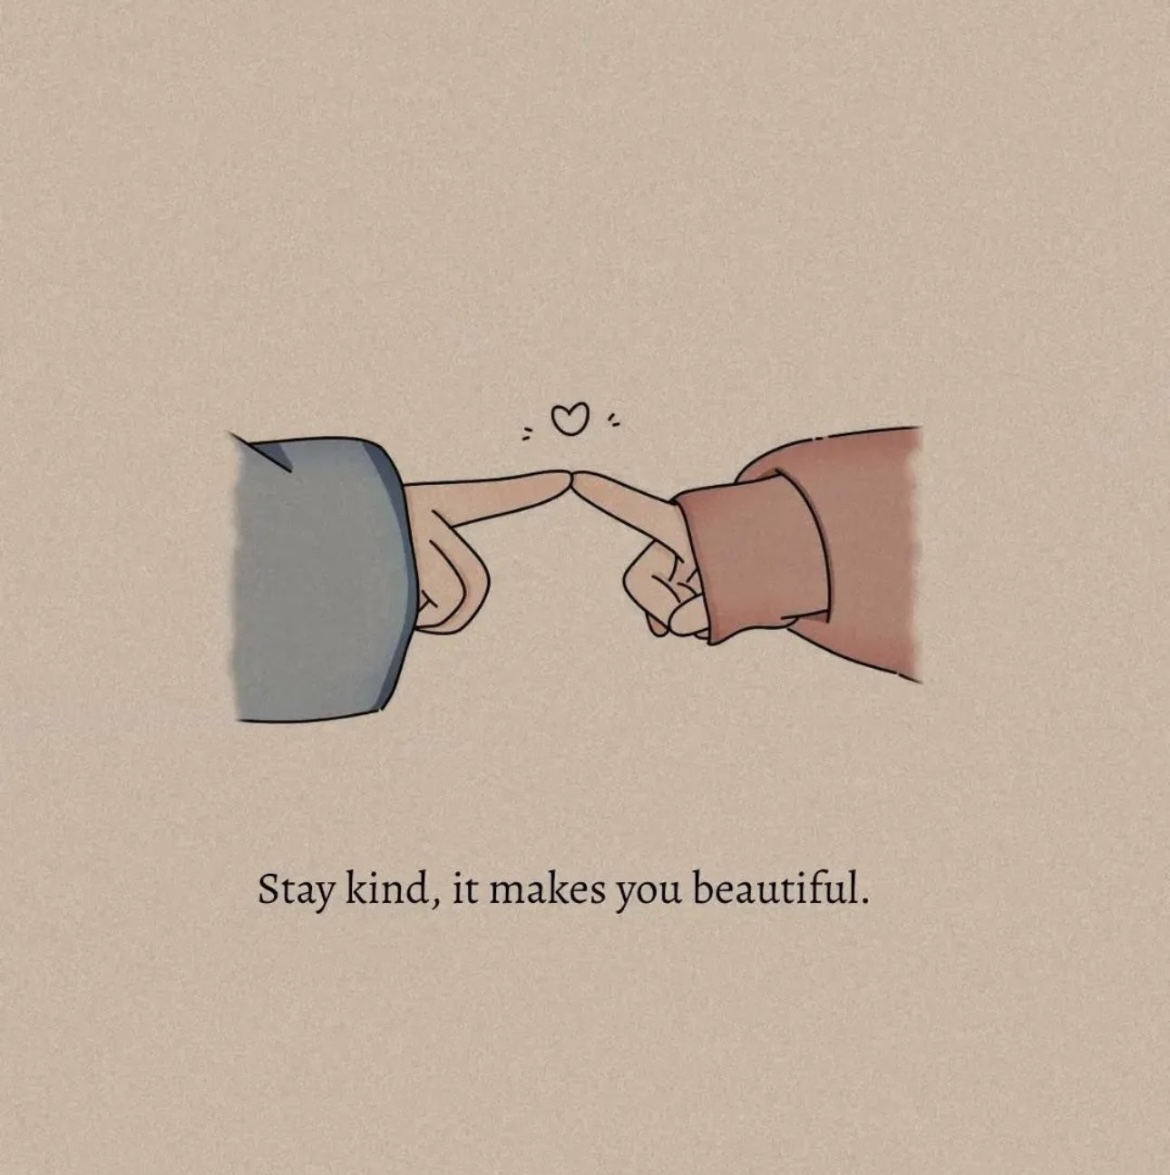 Stay kind